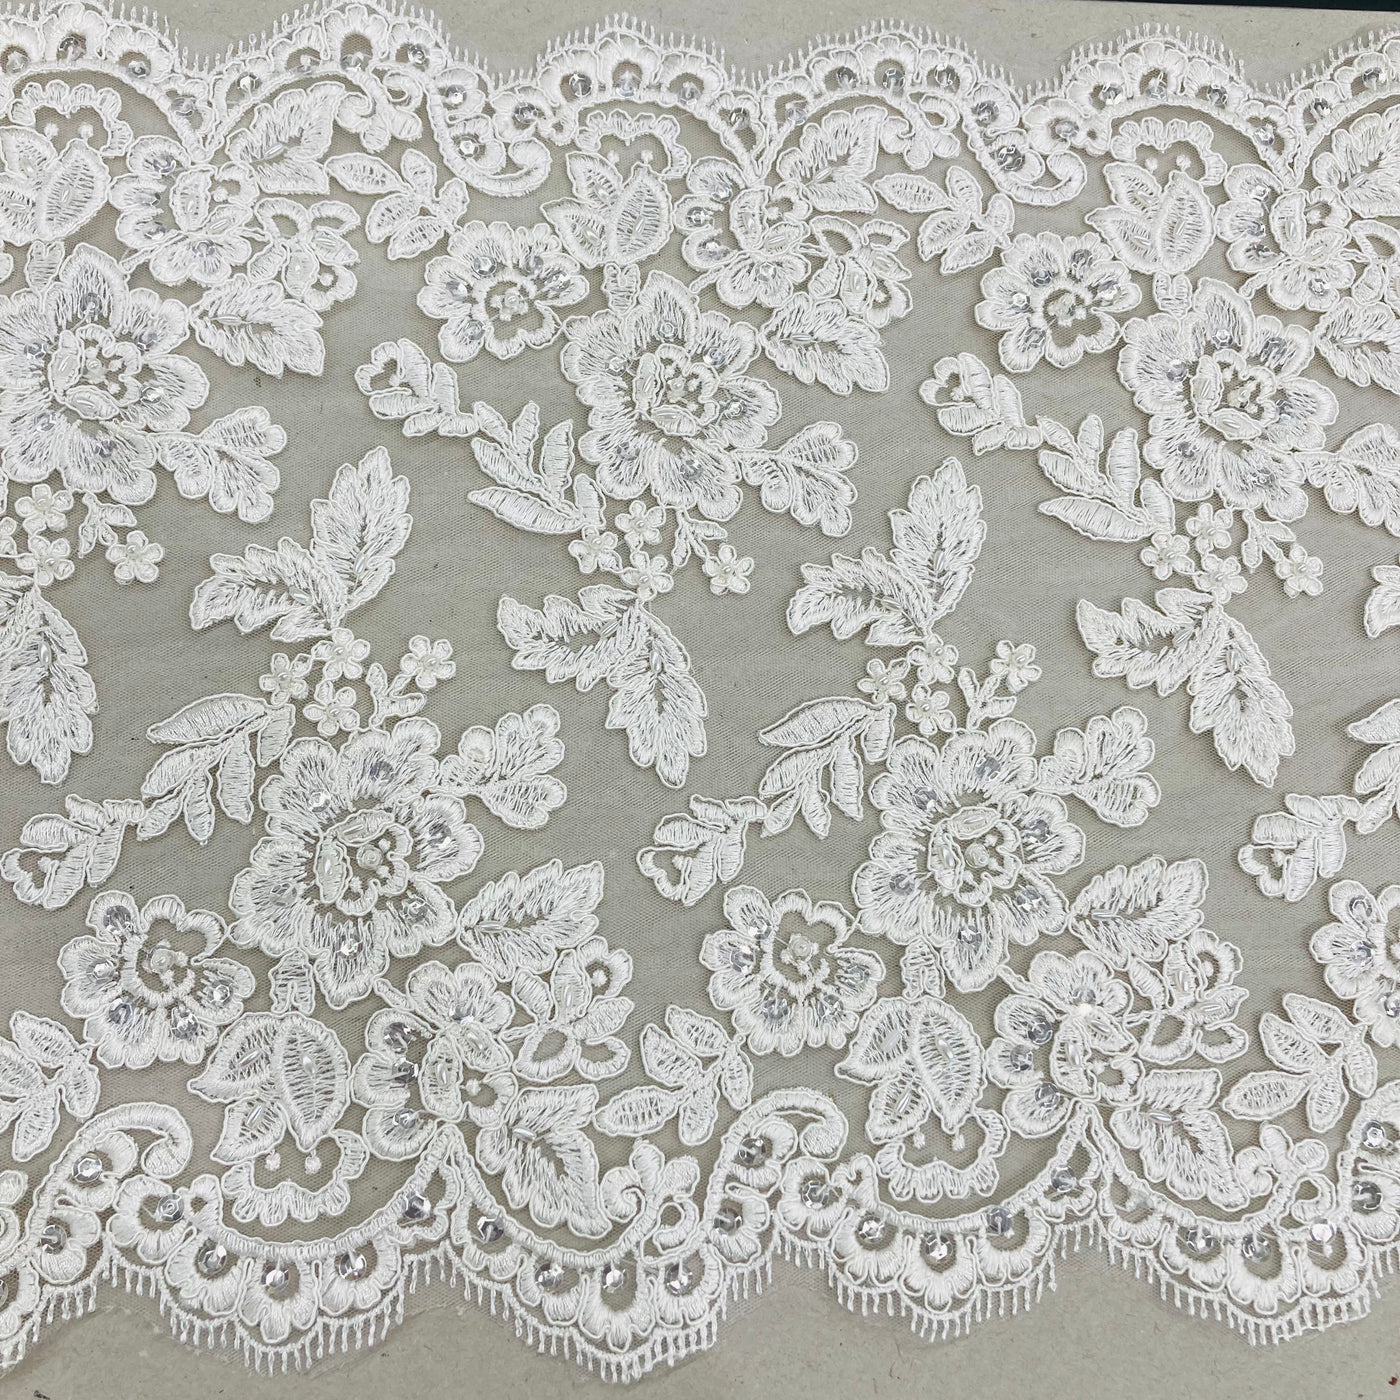 Double Sided Lace Trimming Beaded Corded Embroidered on 100% Polyester Net Mesh | Lace USA